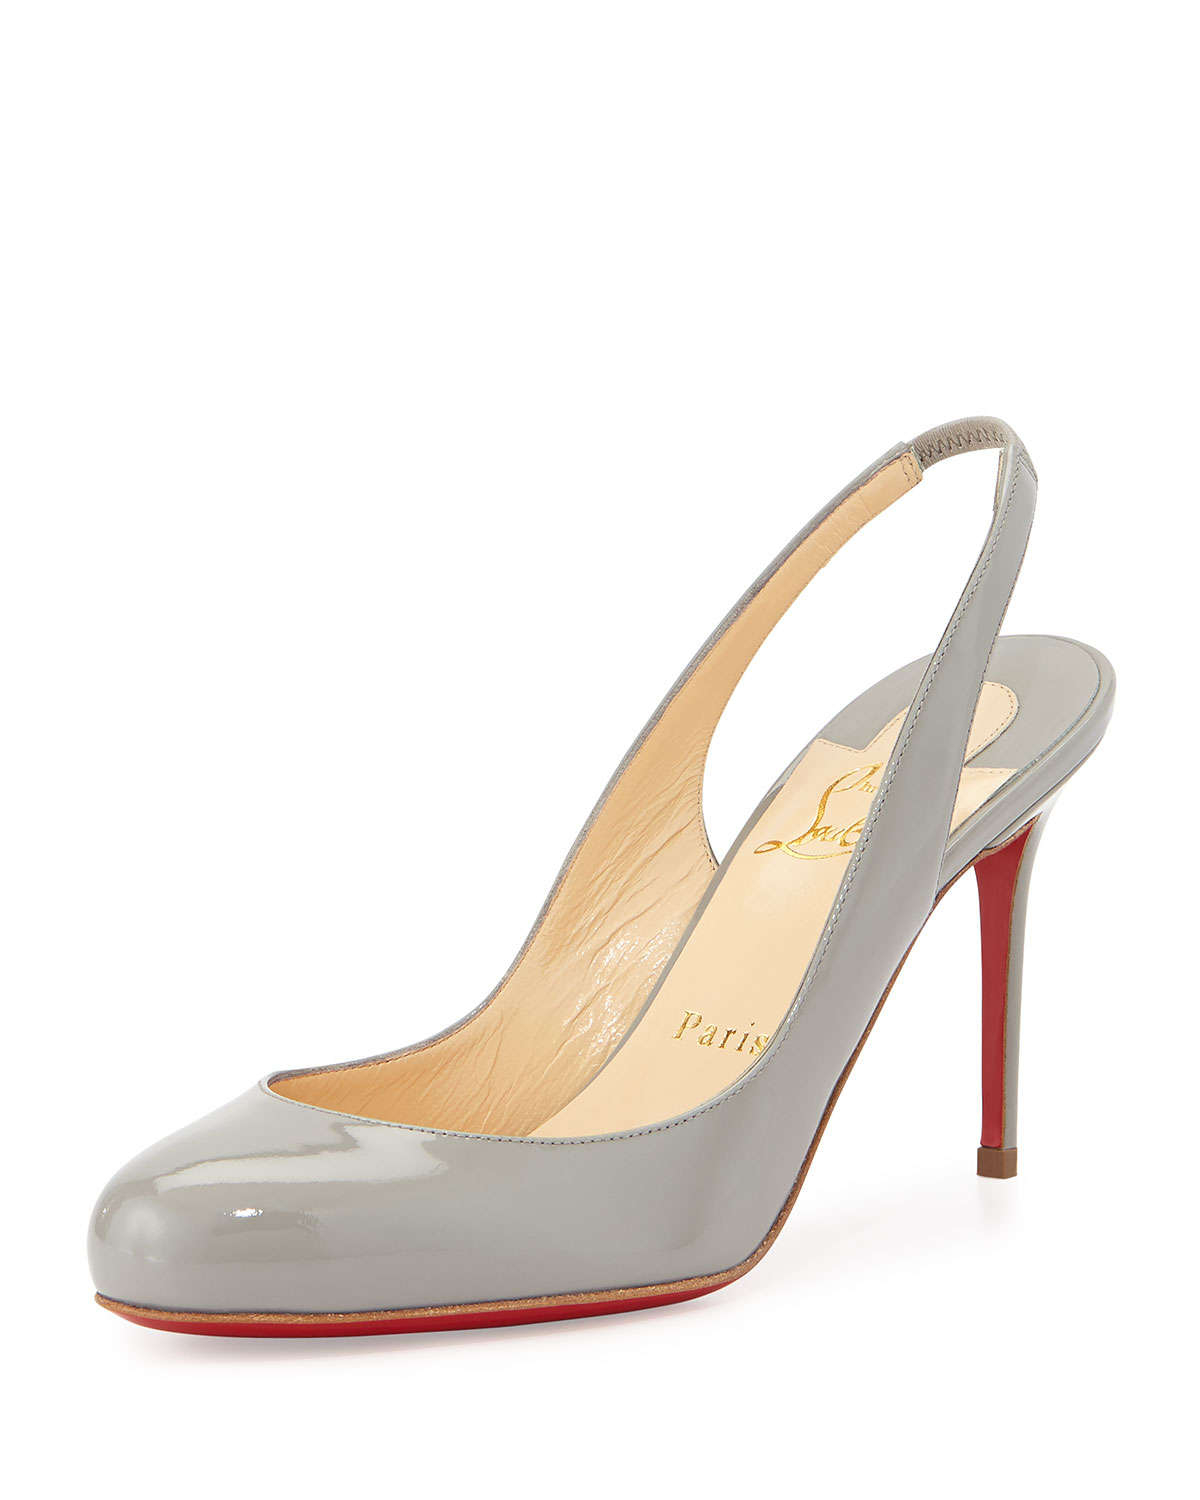 Christian louboutin Fifi Patent Slingback Red Sole Pump in Gray | Lyst  